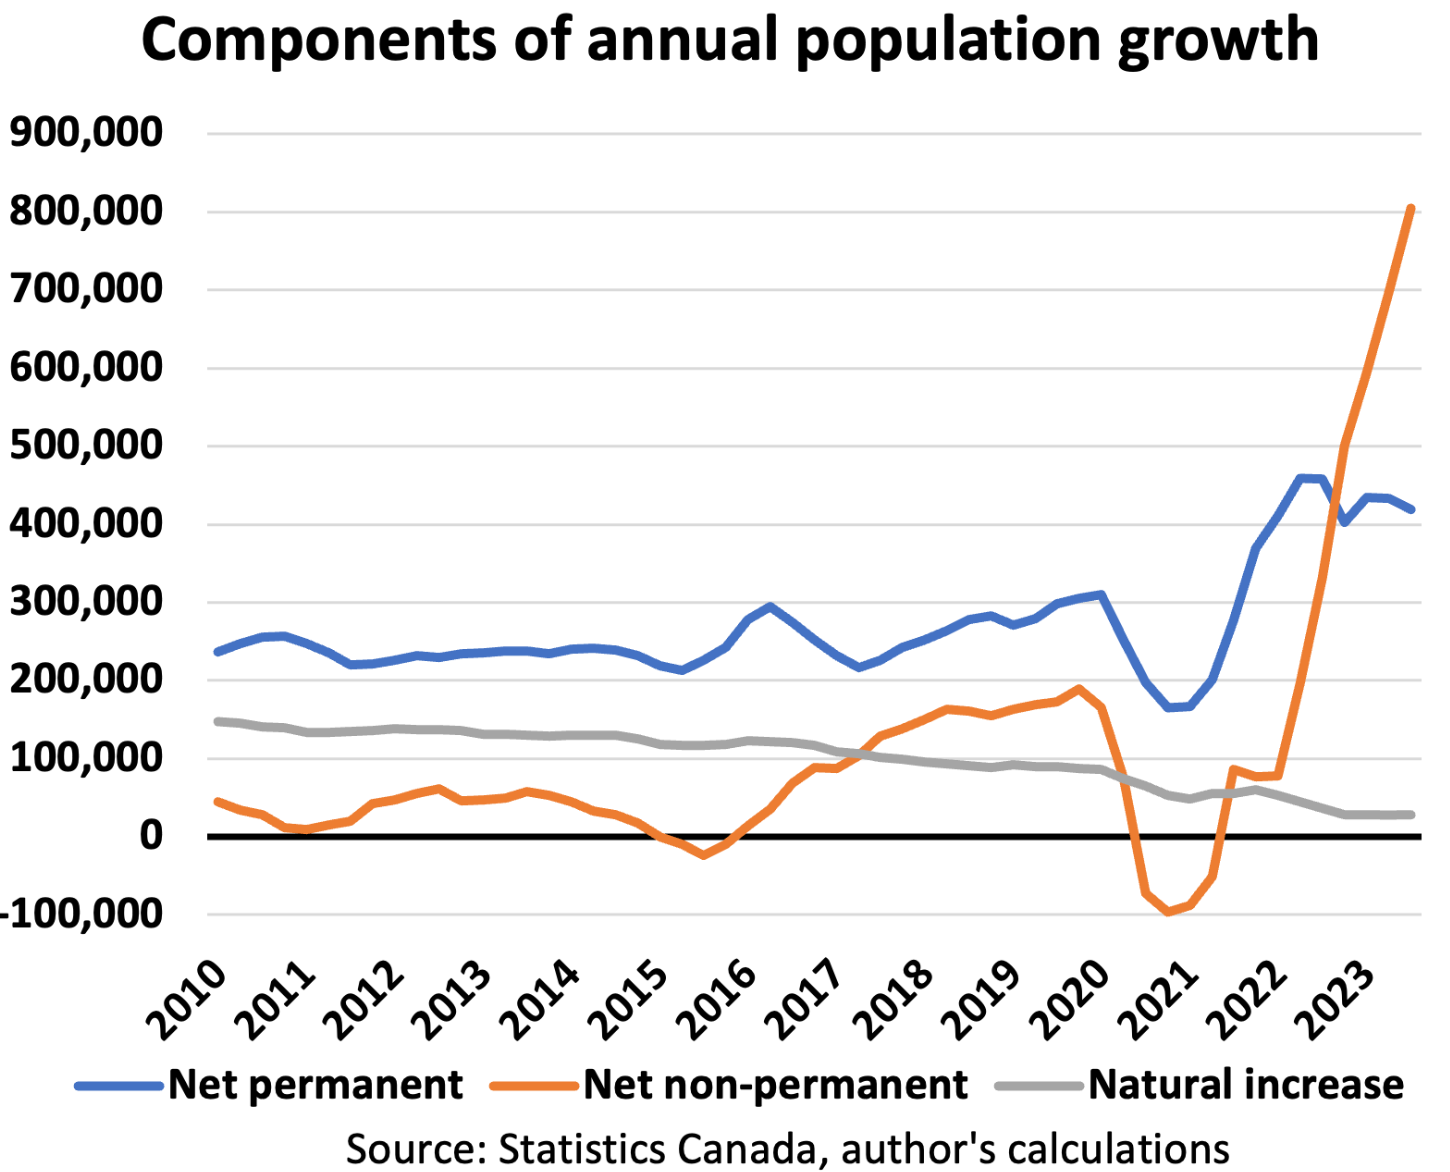 Components of population growth